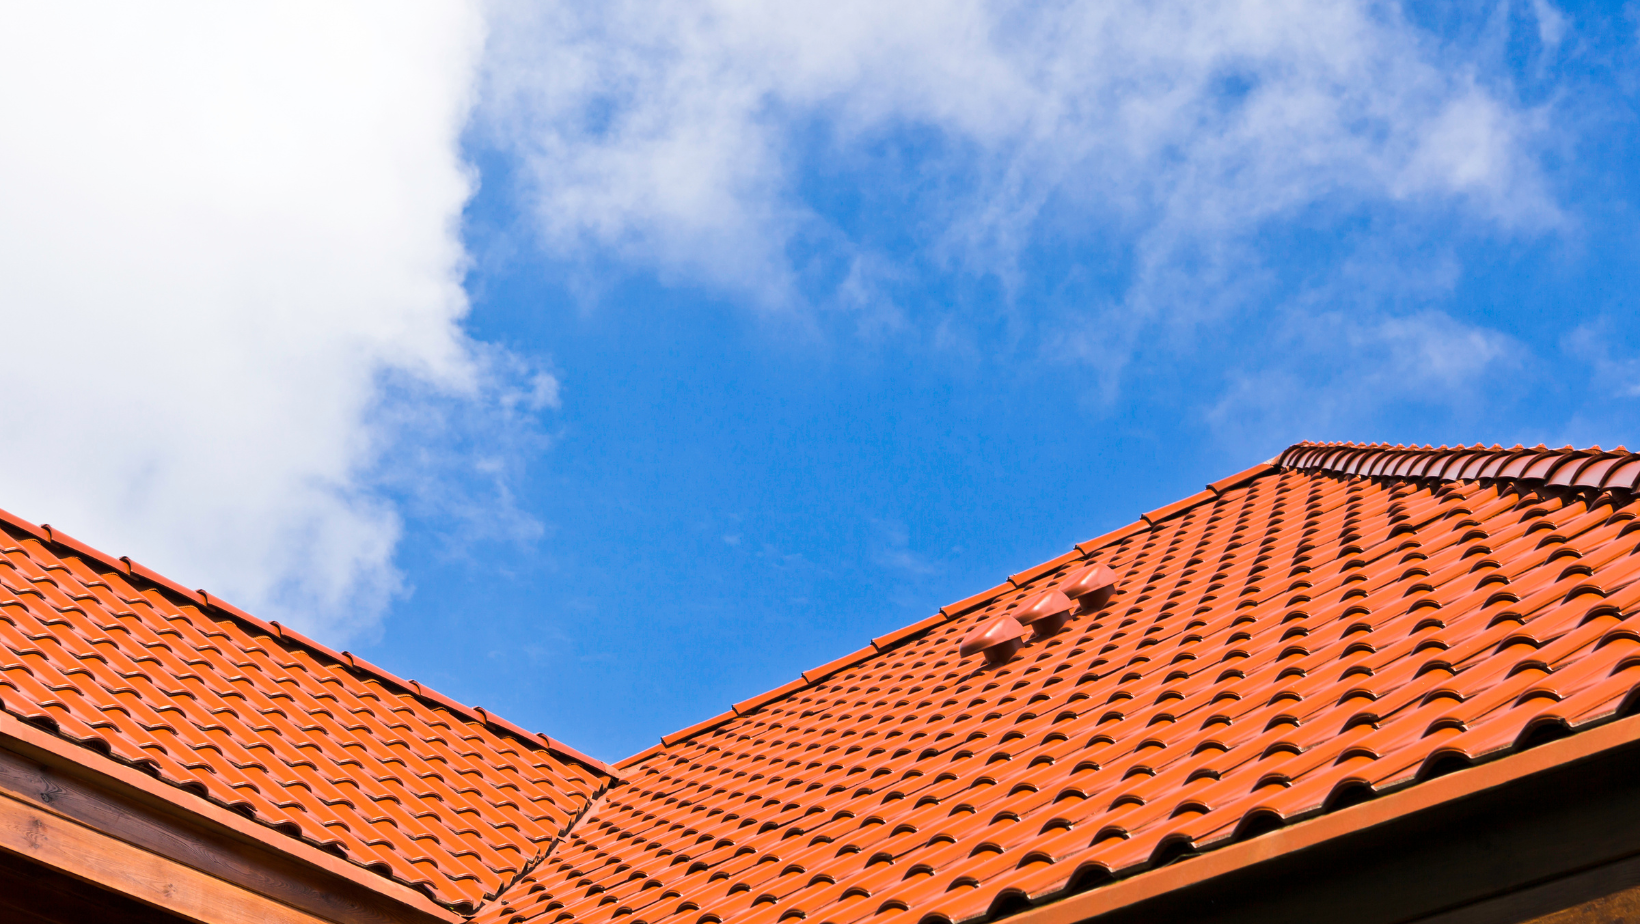 A picture of a terracotta roof in Port St. Lucie, FL